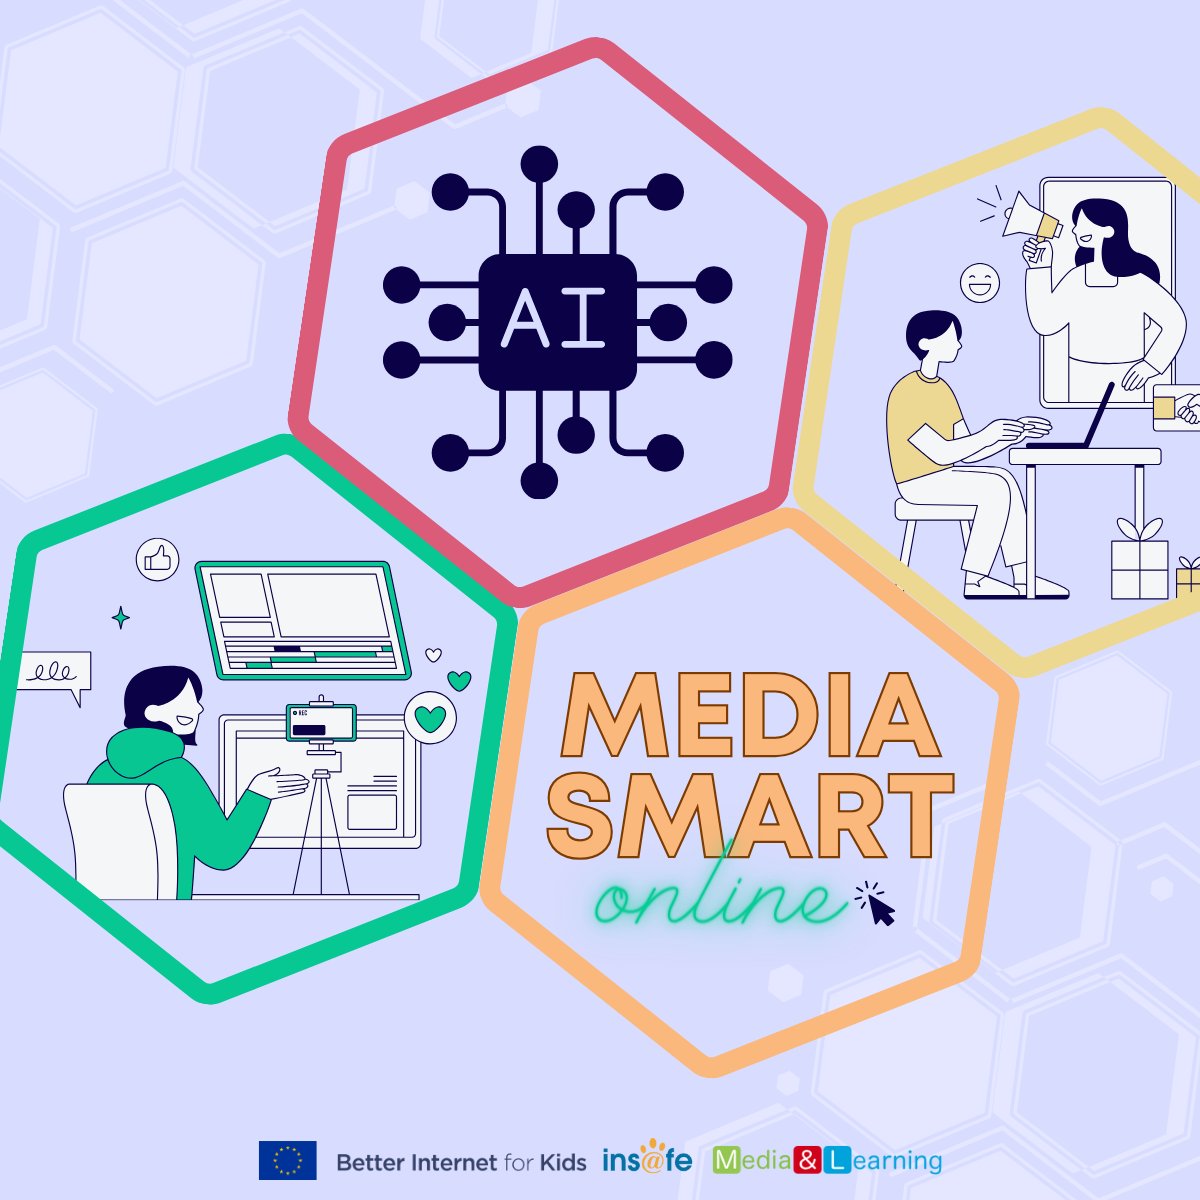 🤖😱The rise of new technologies such as #AI have had a huge impact on #MediaLiteracy, making it easier for #disinformation to spread... 

📚✅#MediaSmartOnline wants to highlight all actions/initiatives available to counteract this. 

👉Discover more bit.ly/3UYQoc1